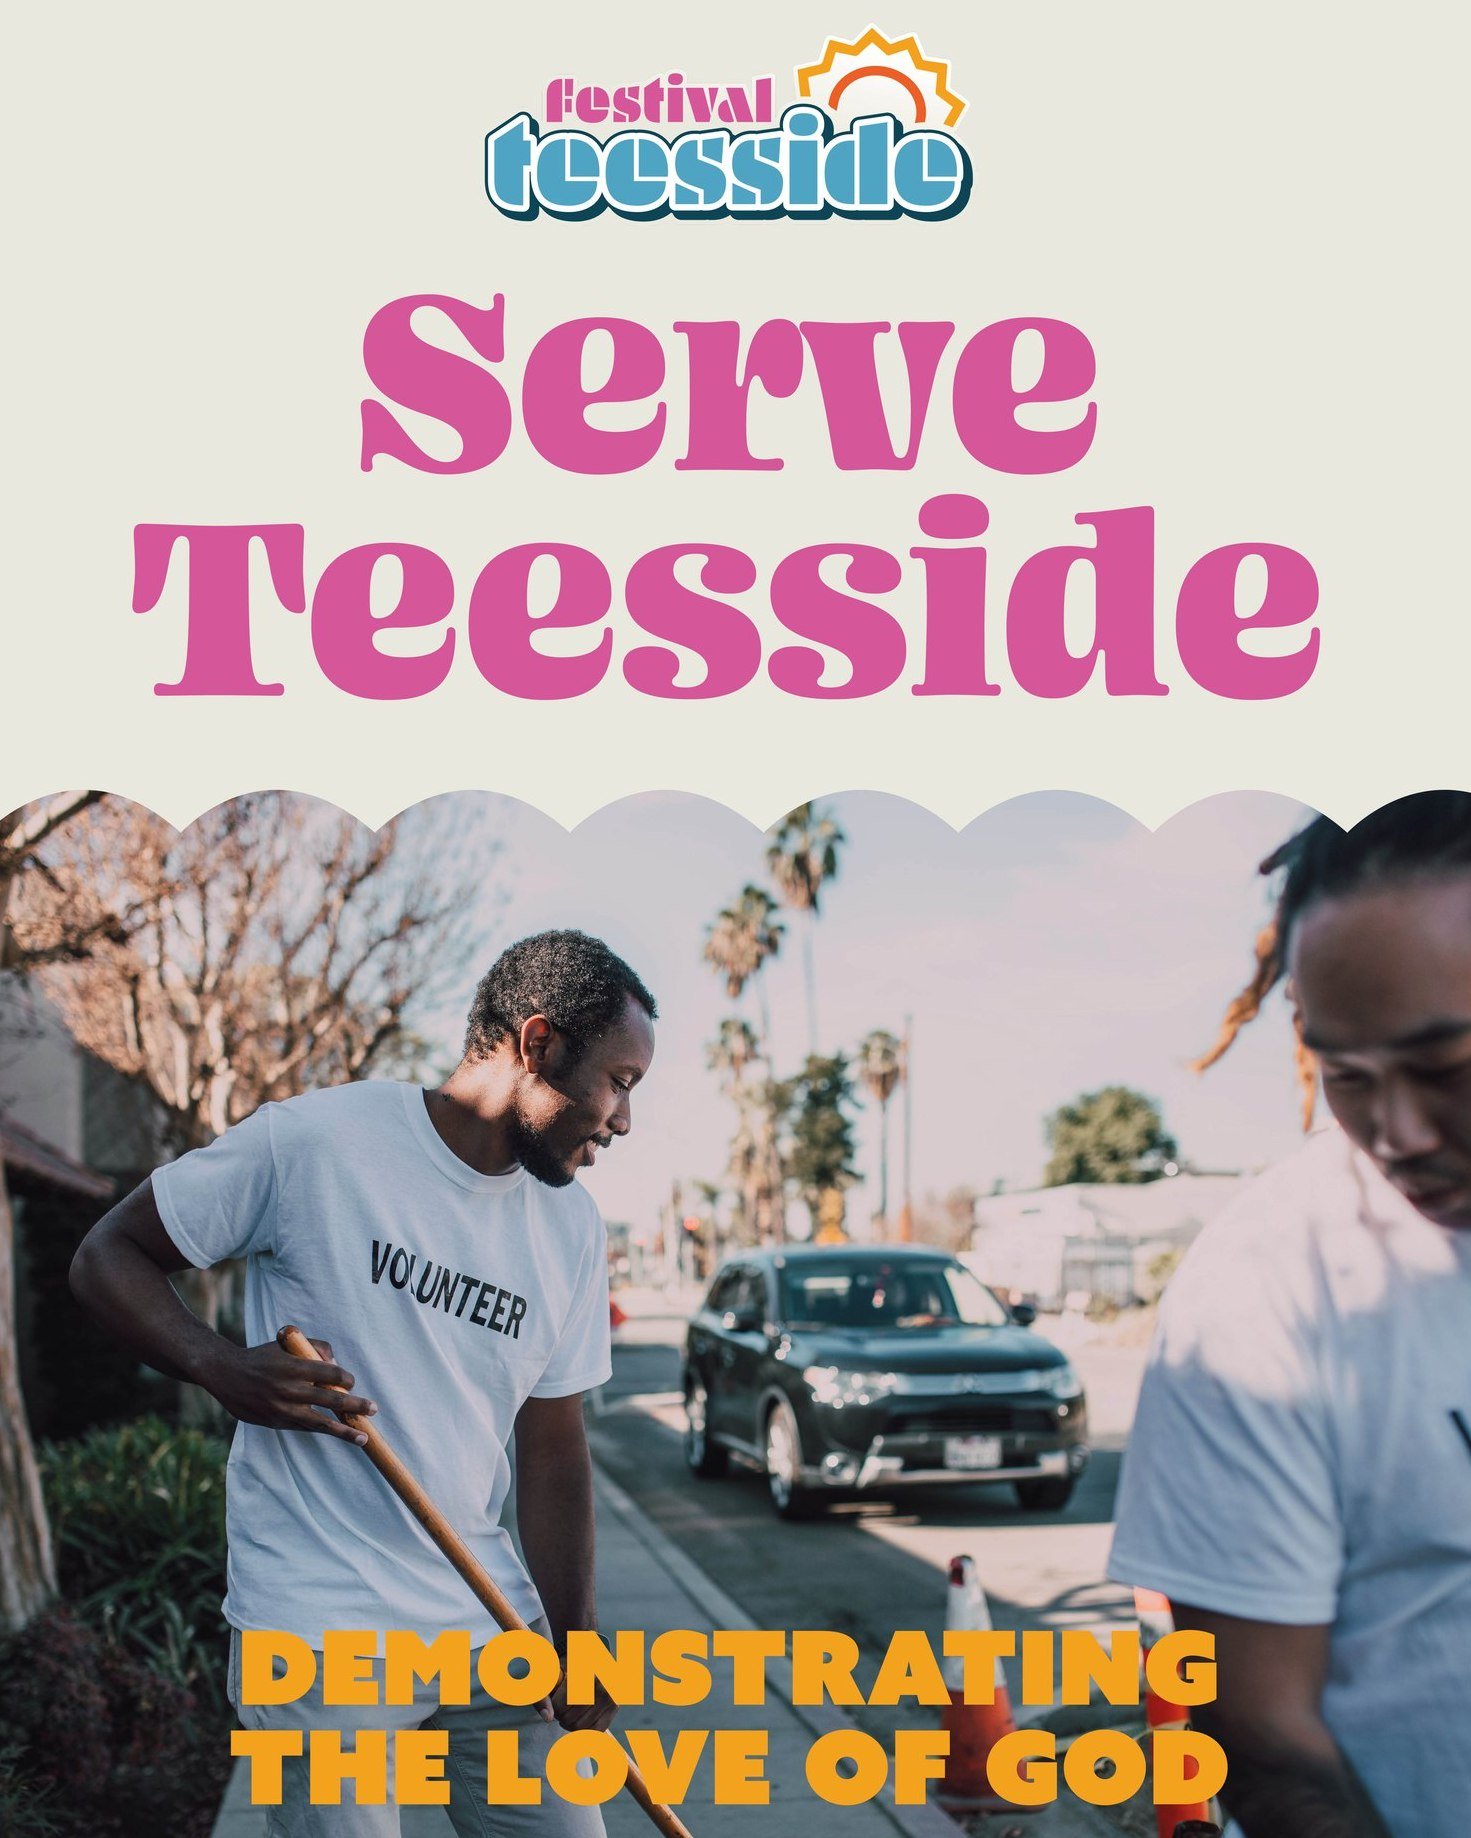 Happy Bank Holiday Monday!
If you're out in the garden today we'd love you to get involved with our Serve Teesside project on Sun 19th May. We'll be working on the Easterside Community Garden with Health Village CIC. More info &amp; sign-up here:
htt